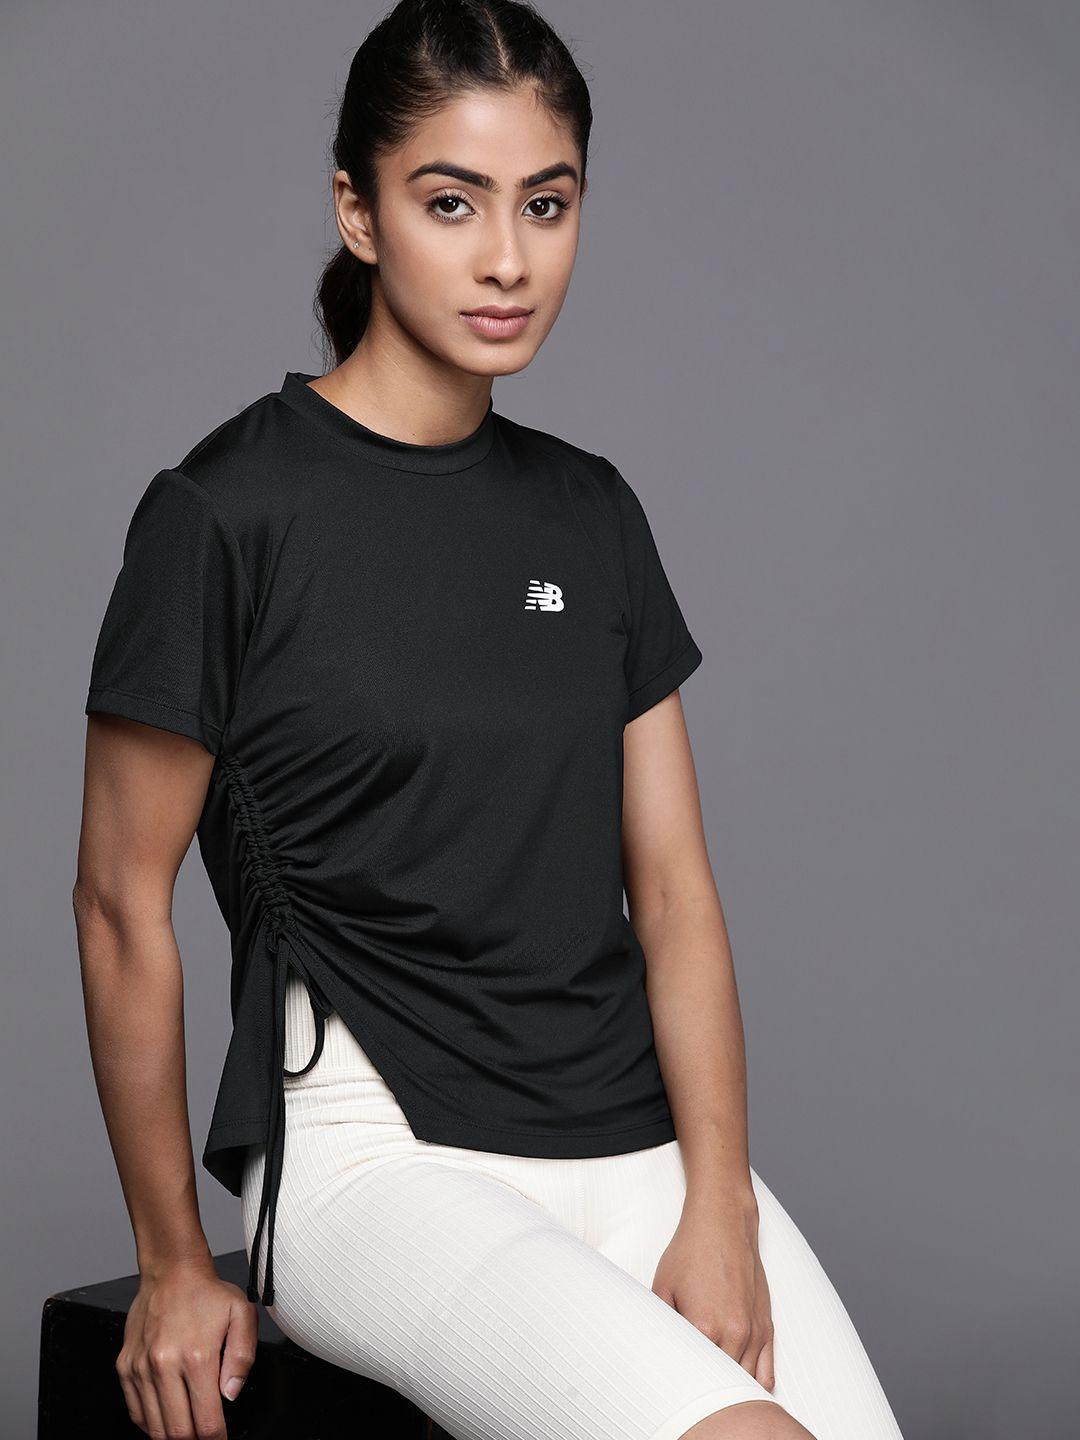 new balance moisture wicking ruched detail top